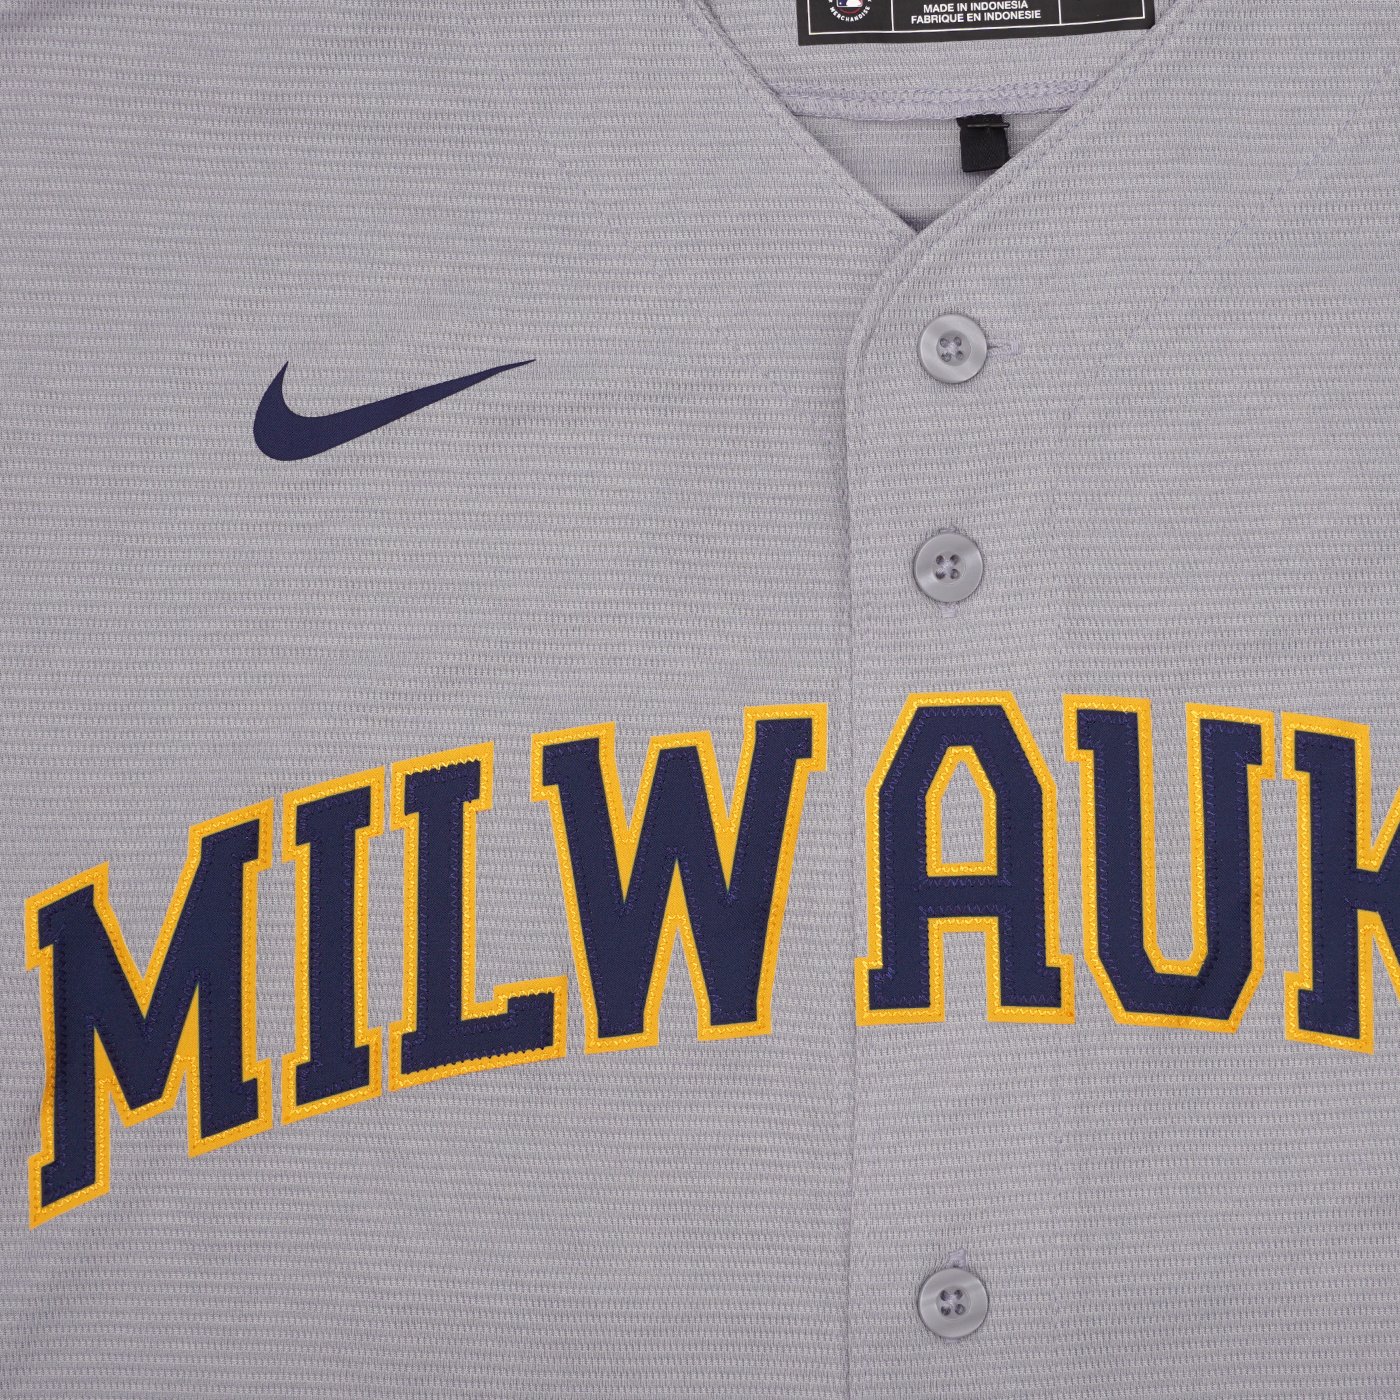 Nike Men's Christian Yelich Gray Milwaukee Brewers Road Authentic Player Logo Jersey - Gray